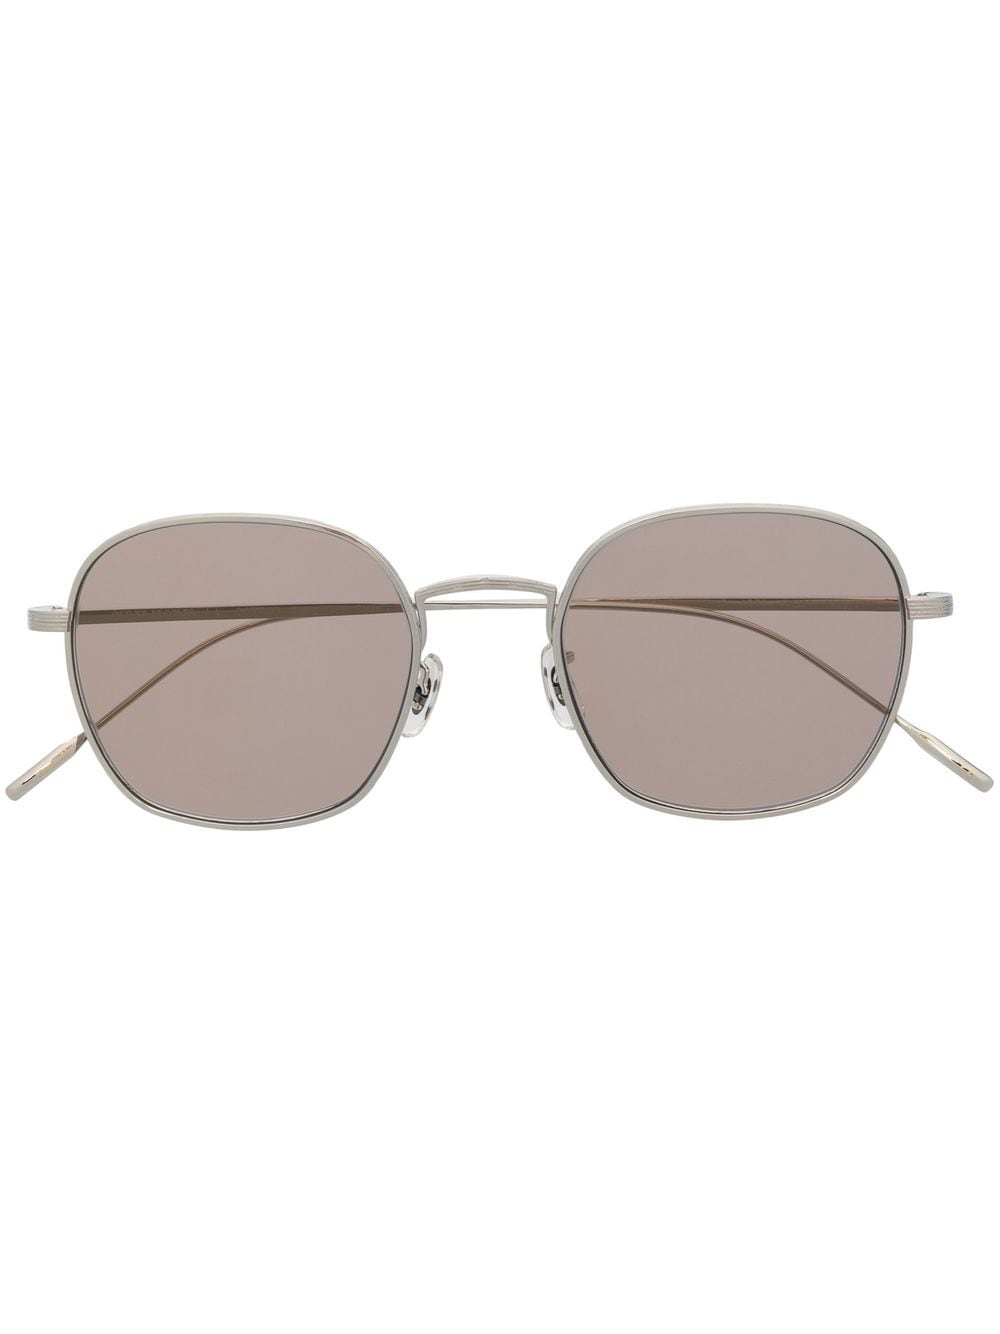 Image 1 of Oliver Peoples round-frame sunglasses